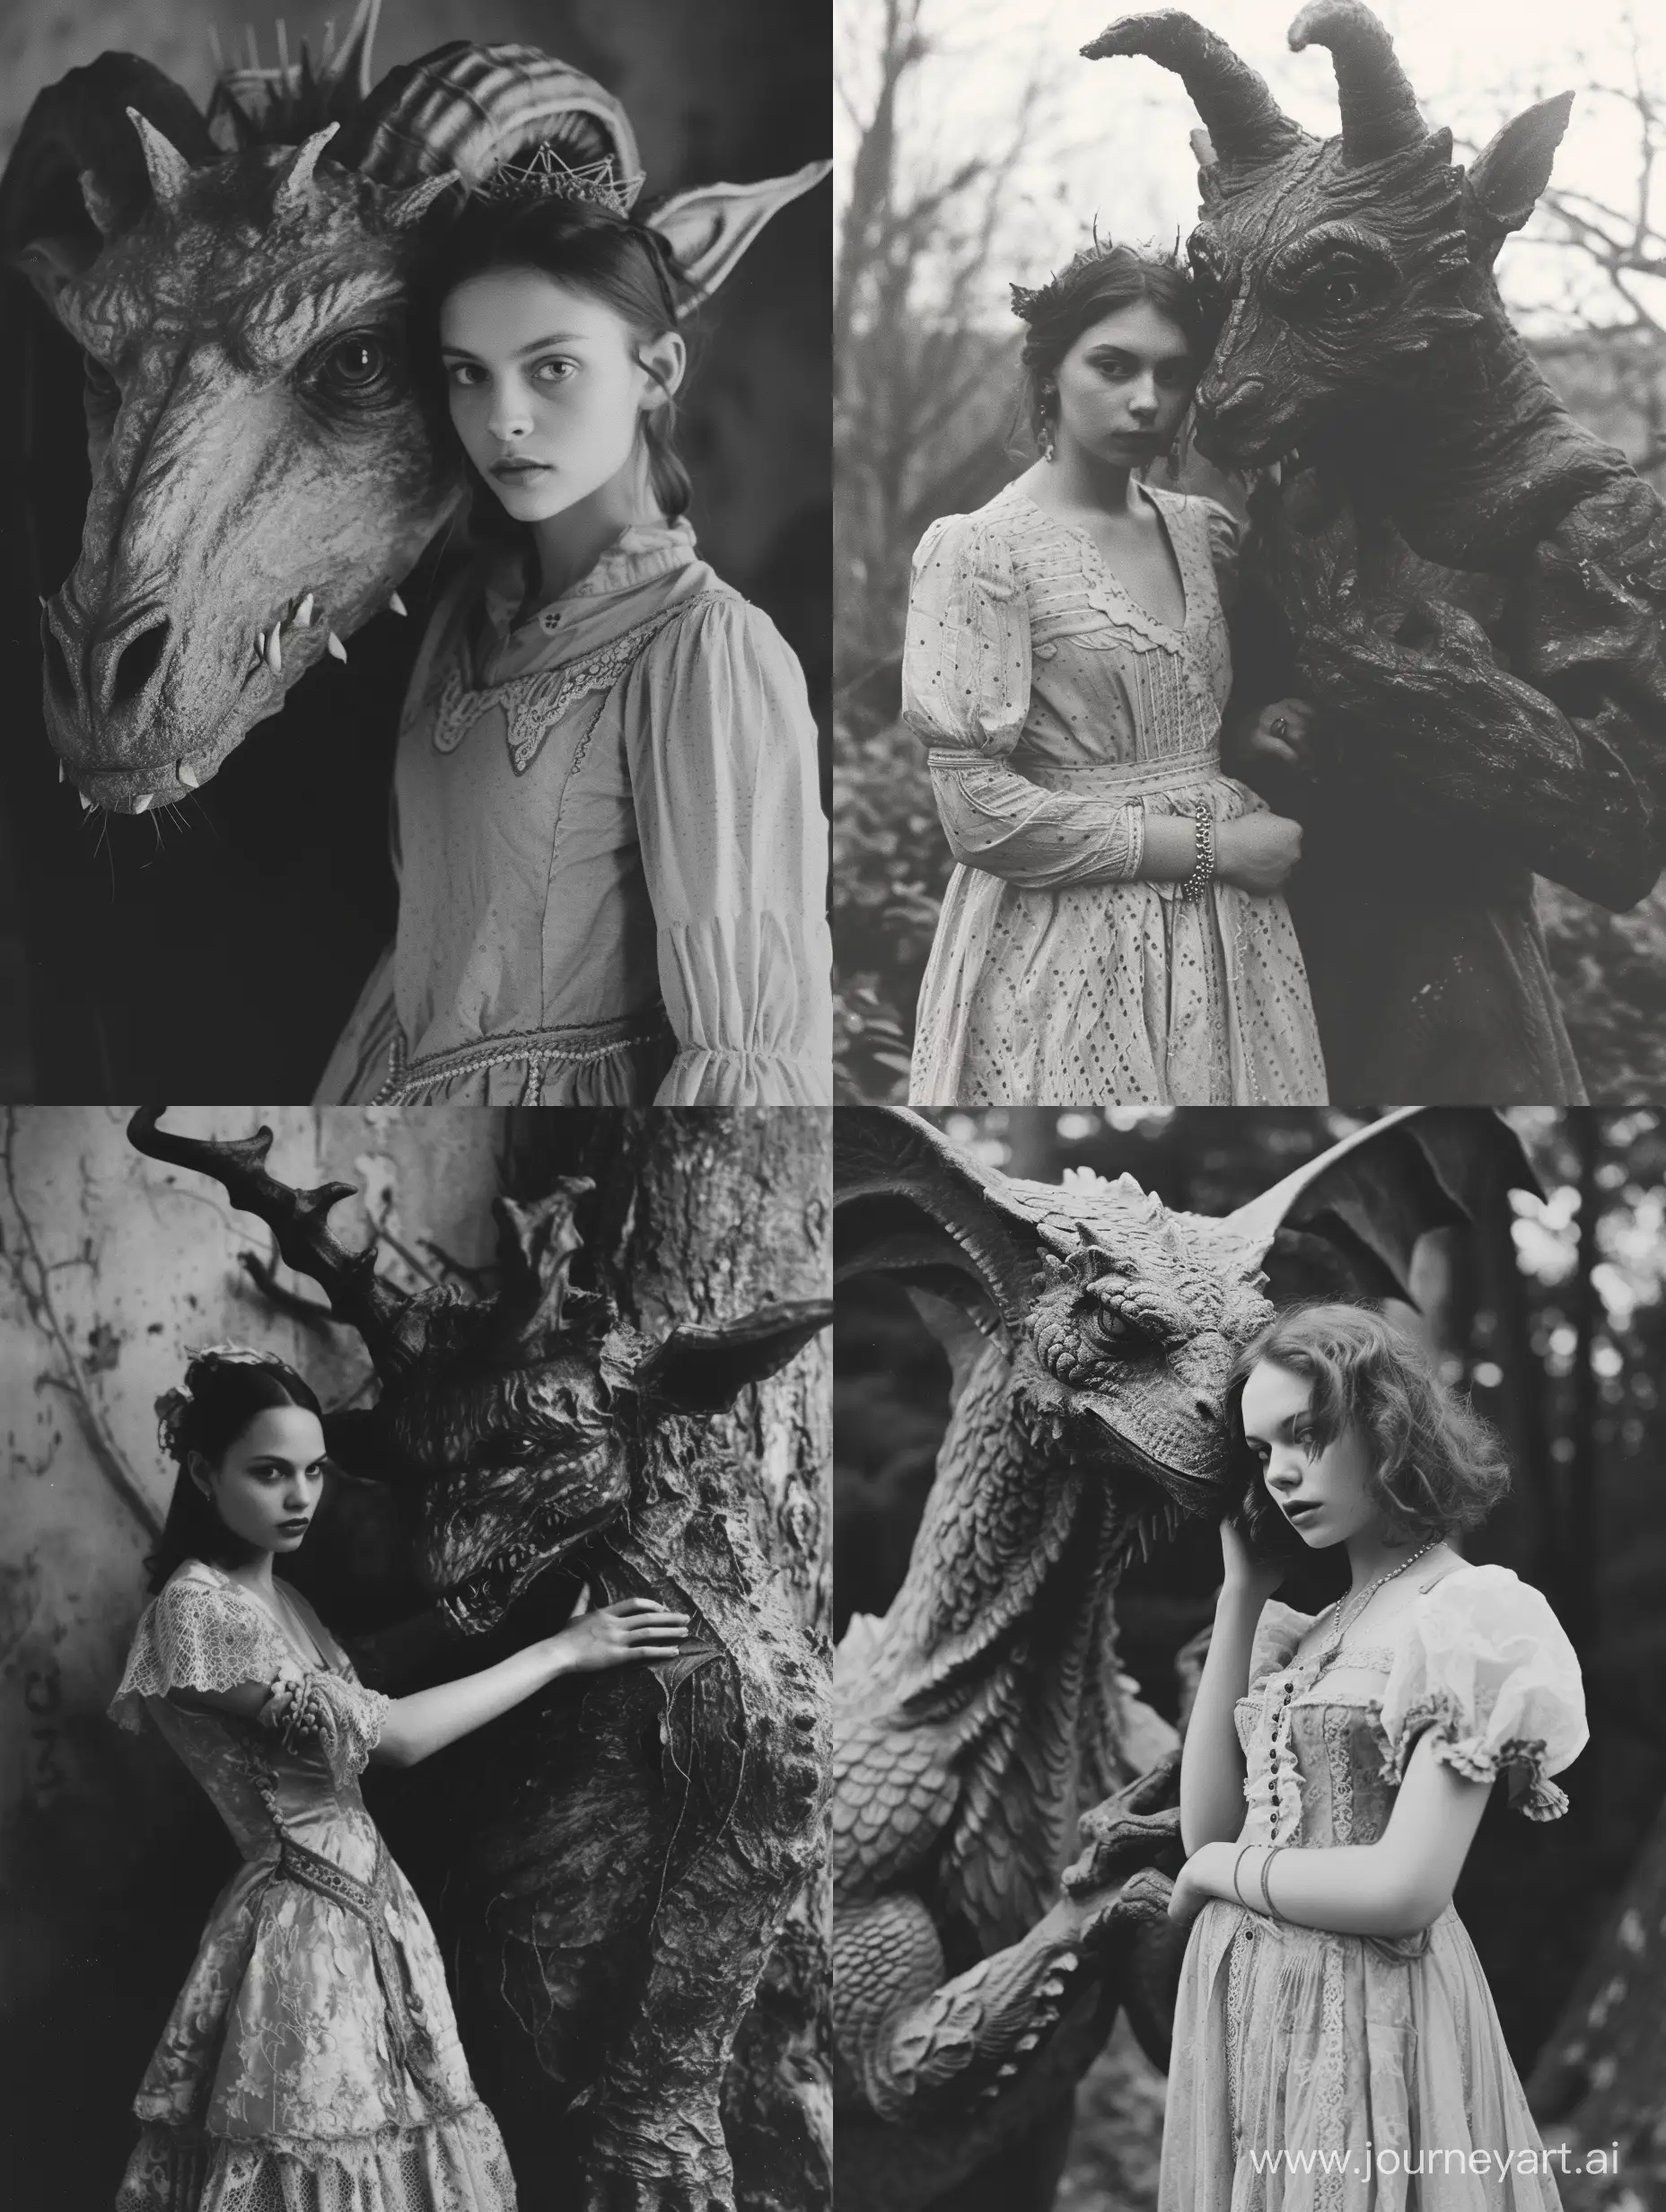 grayscale photo that evokes folk horror, capturing an obscure and unsettling yet beautiful encounter between a beautiful young woman in a vintage dress and a large demon creature, attention to detail, folk horror, dark aesthetic, dark folk, dark magic, expired 35mm film --v 6 --ar 3:4 --no 11653